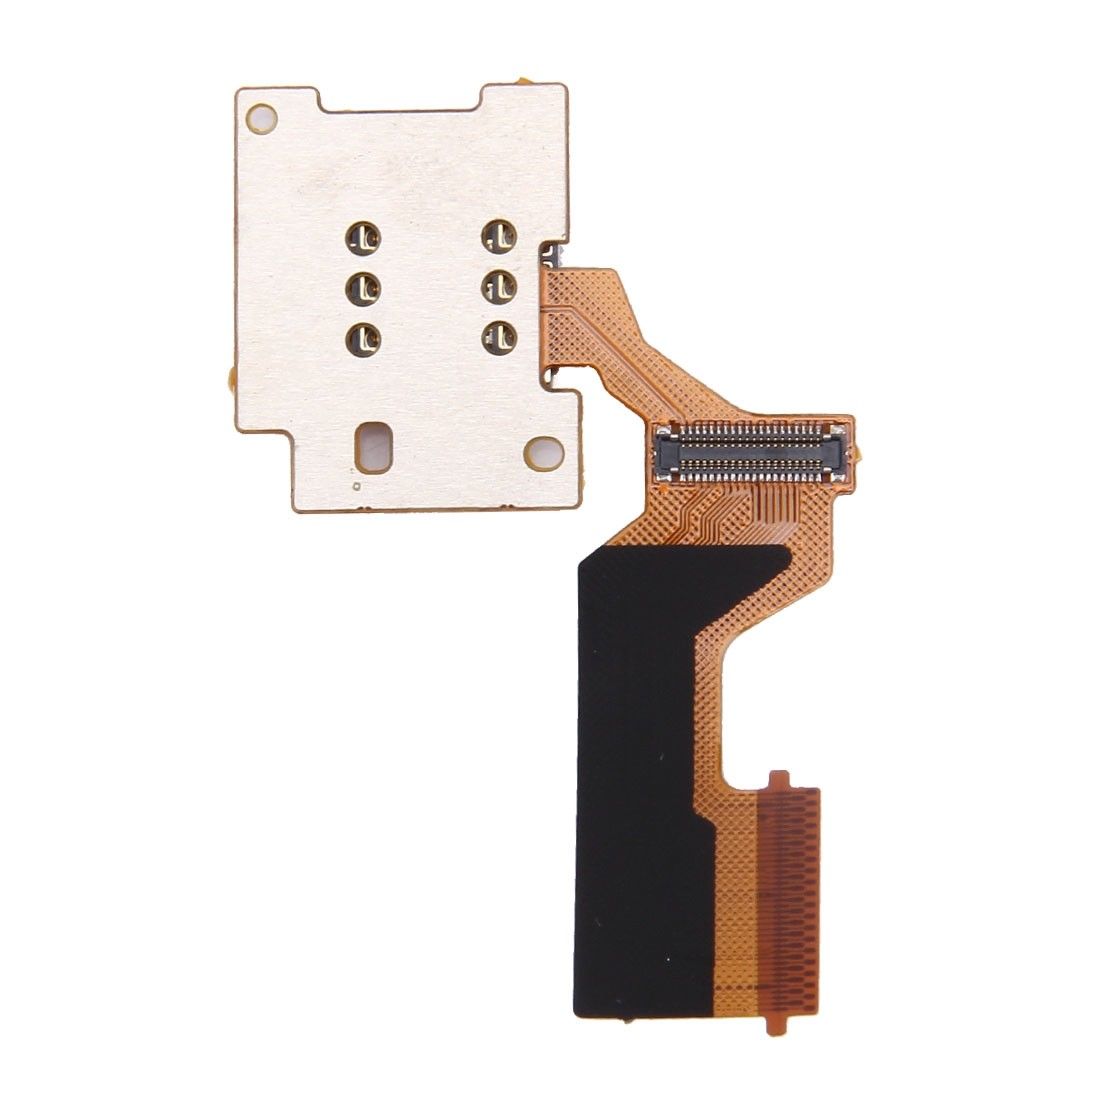 HTC One M9 Replacement Sim Card Reader for [product_price] - First Help Tech